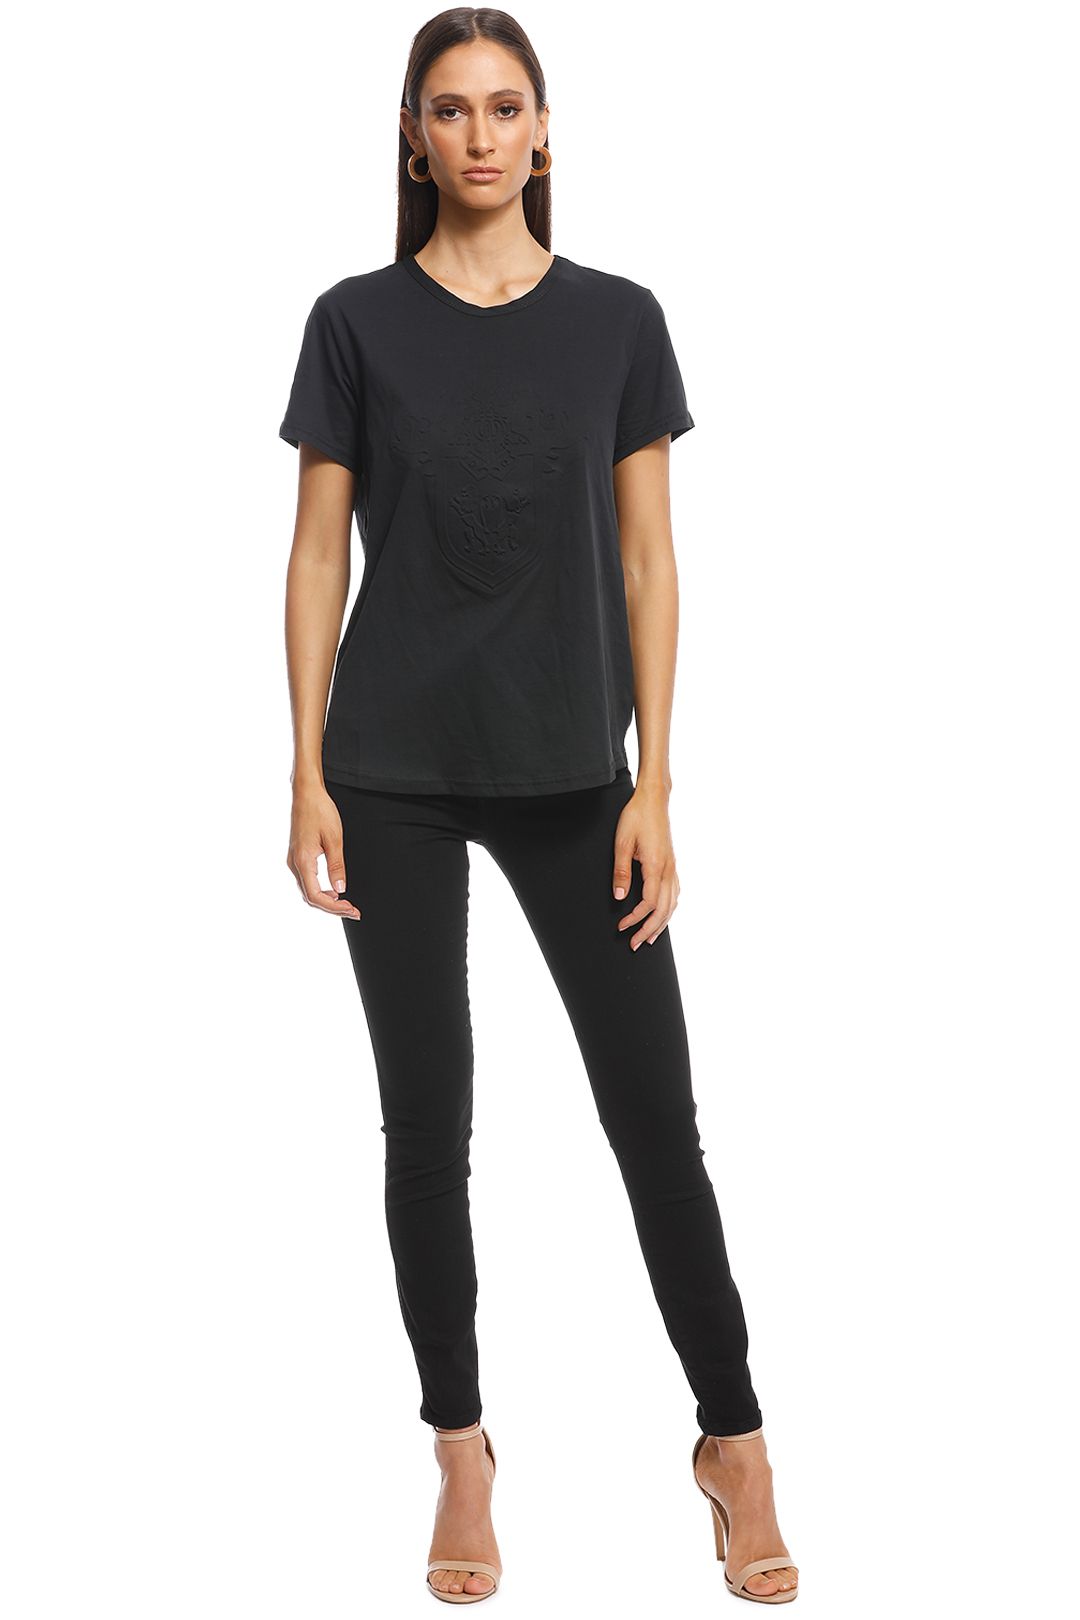 Camilla and Marc - Fay Crest Tee - Black - Front